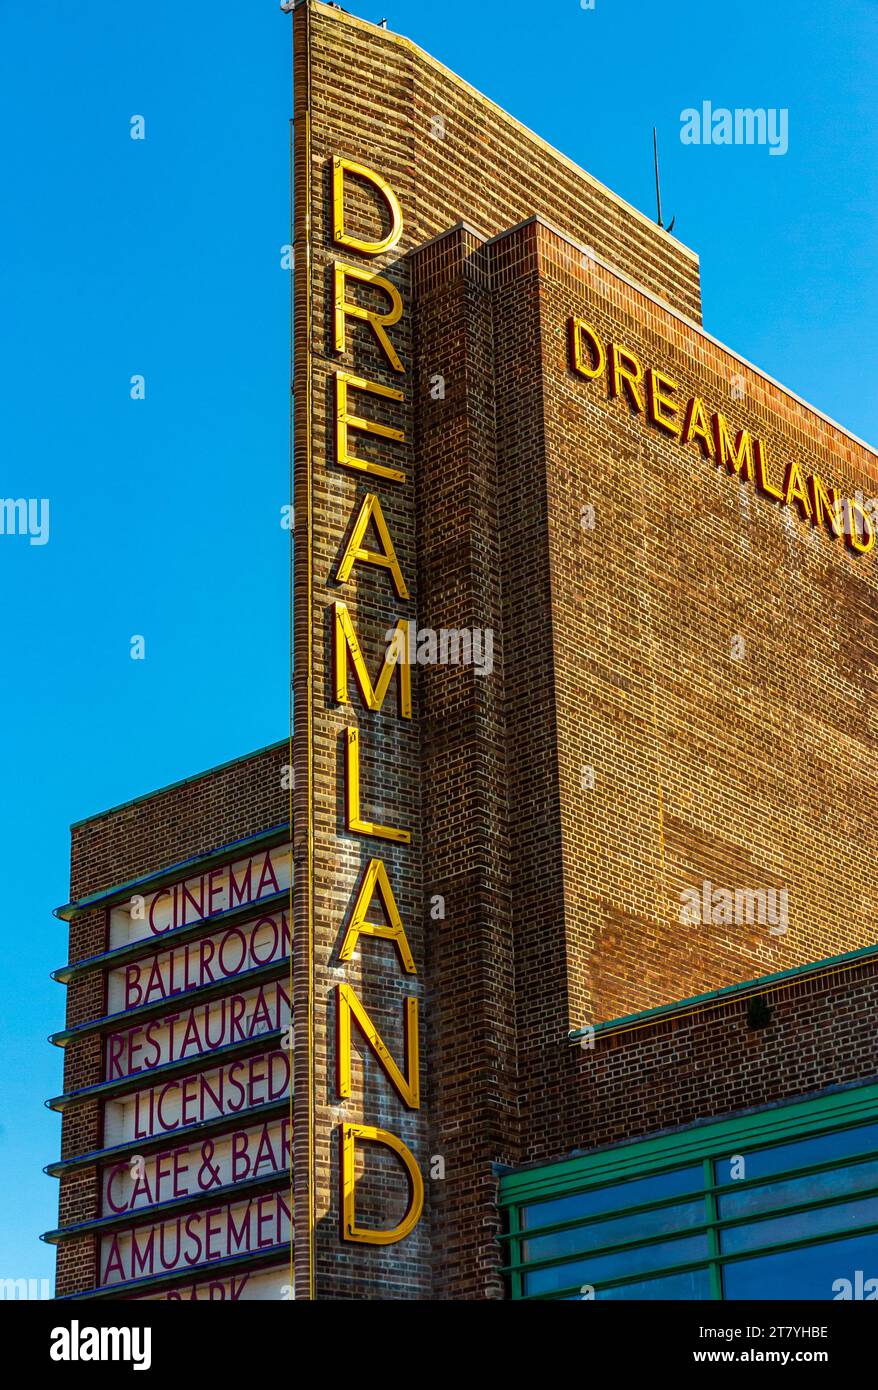 The art deco fin tower on the exterior of Dreamland Cinema in Margate Kent England UK designed by Julian Rudolph Leathart and W.F. Granger opened 1935 Stock Photo